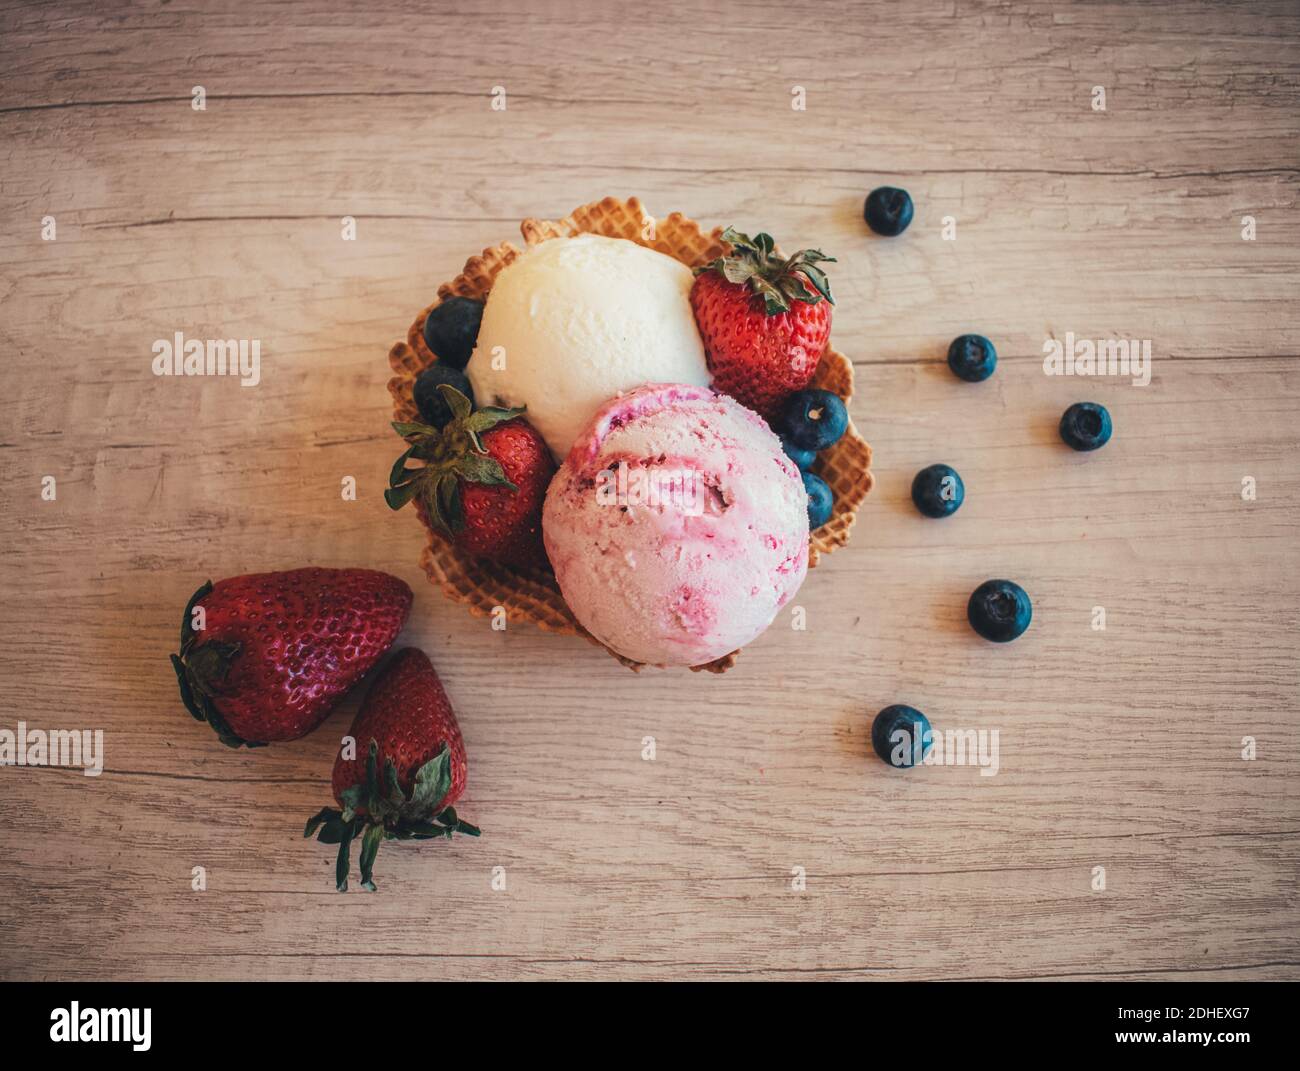 A top view of two scoops of strawberry and vanilla ice cream in a waffle cone on a wooden surface Stock Photo